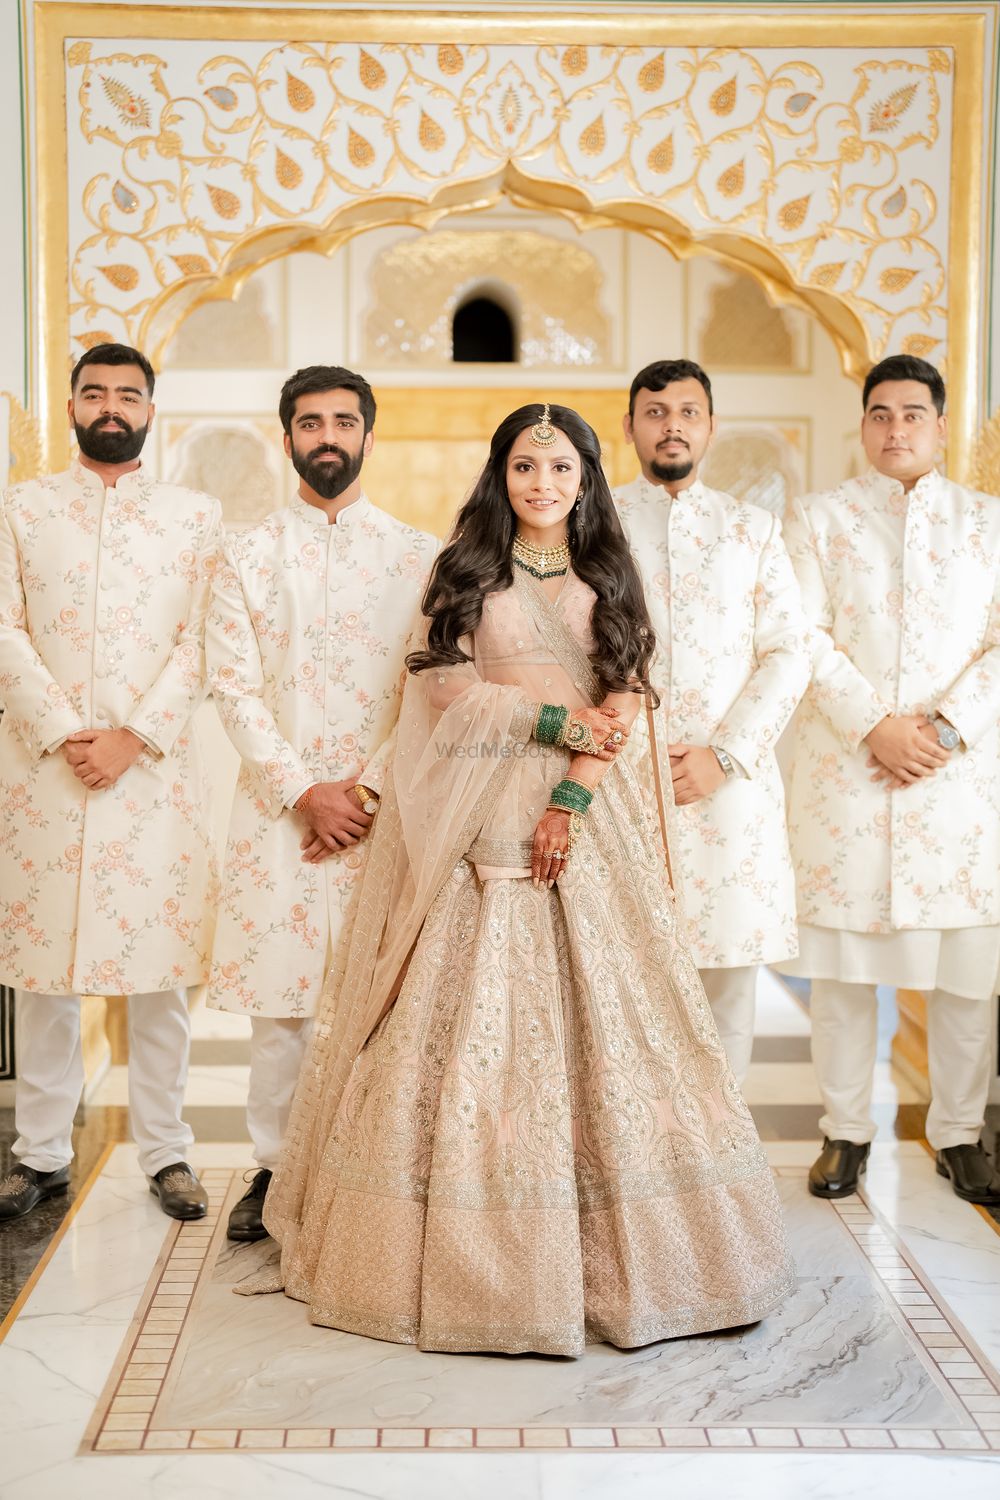 Photo of bride with bridesmen all wearing pastels